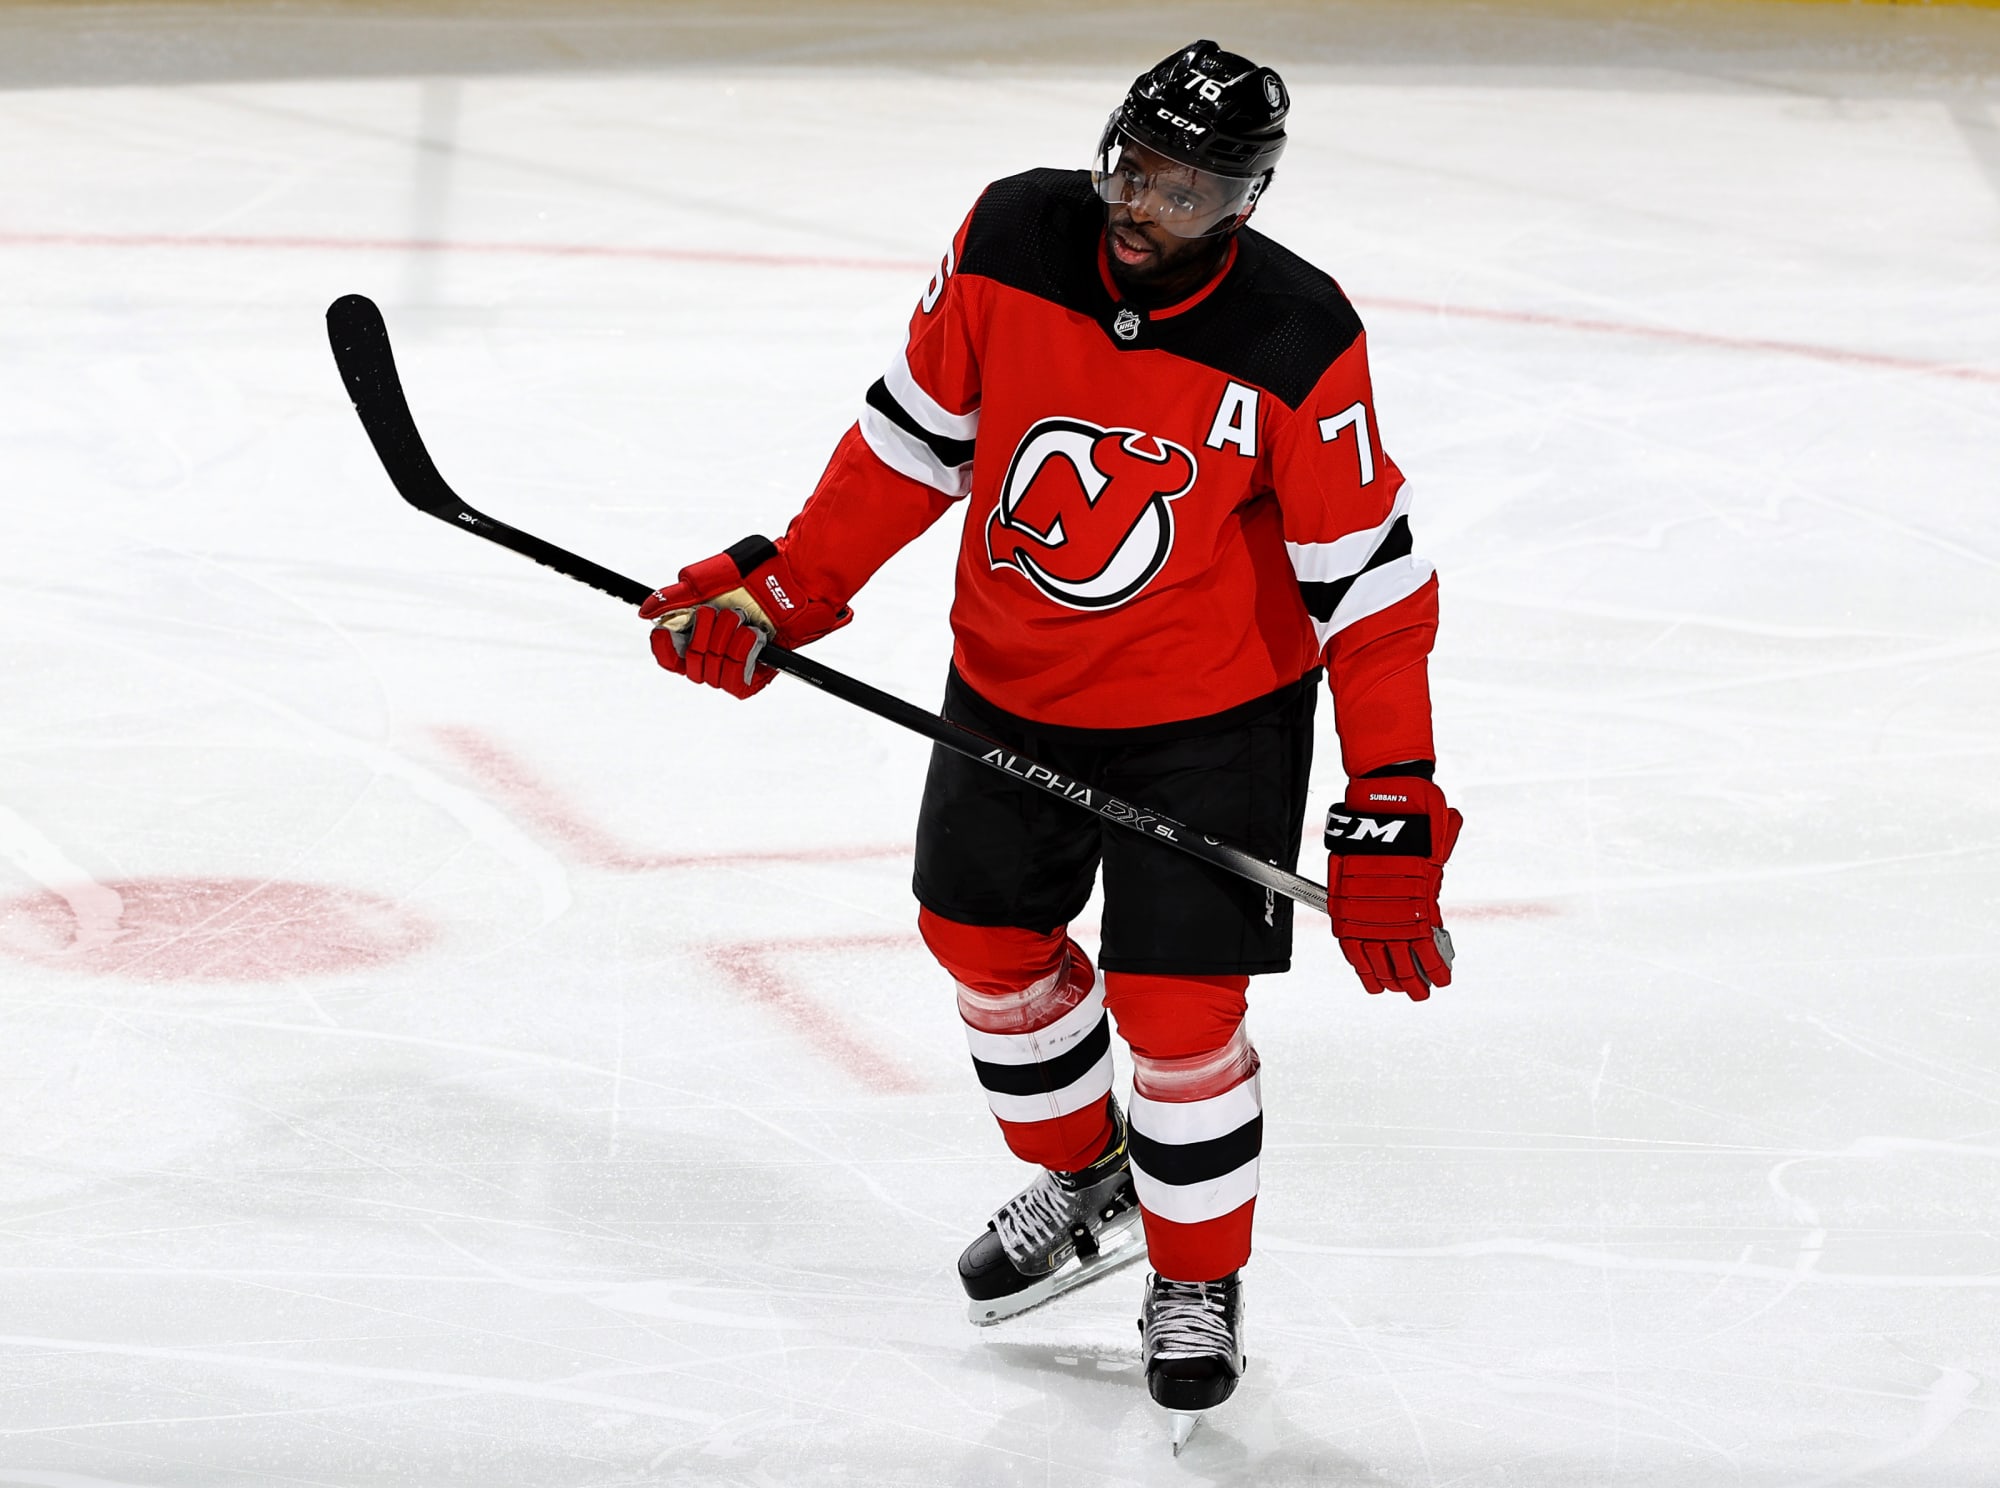 P.K. Subban Revamps National Reputation With New Jersey Devils